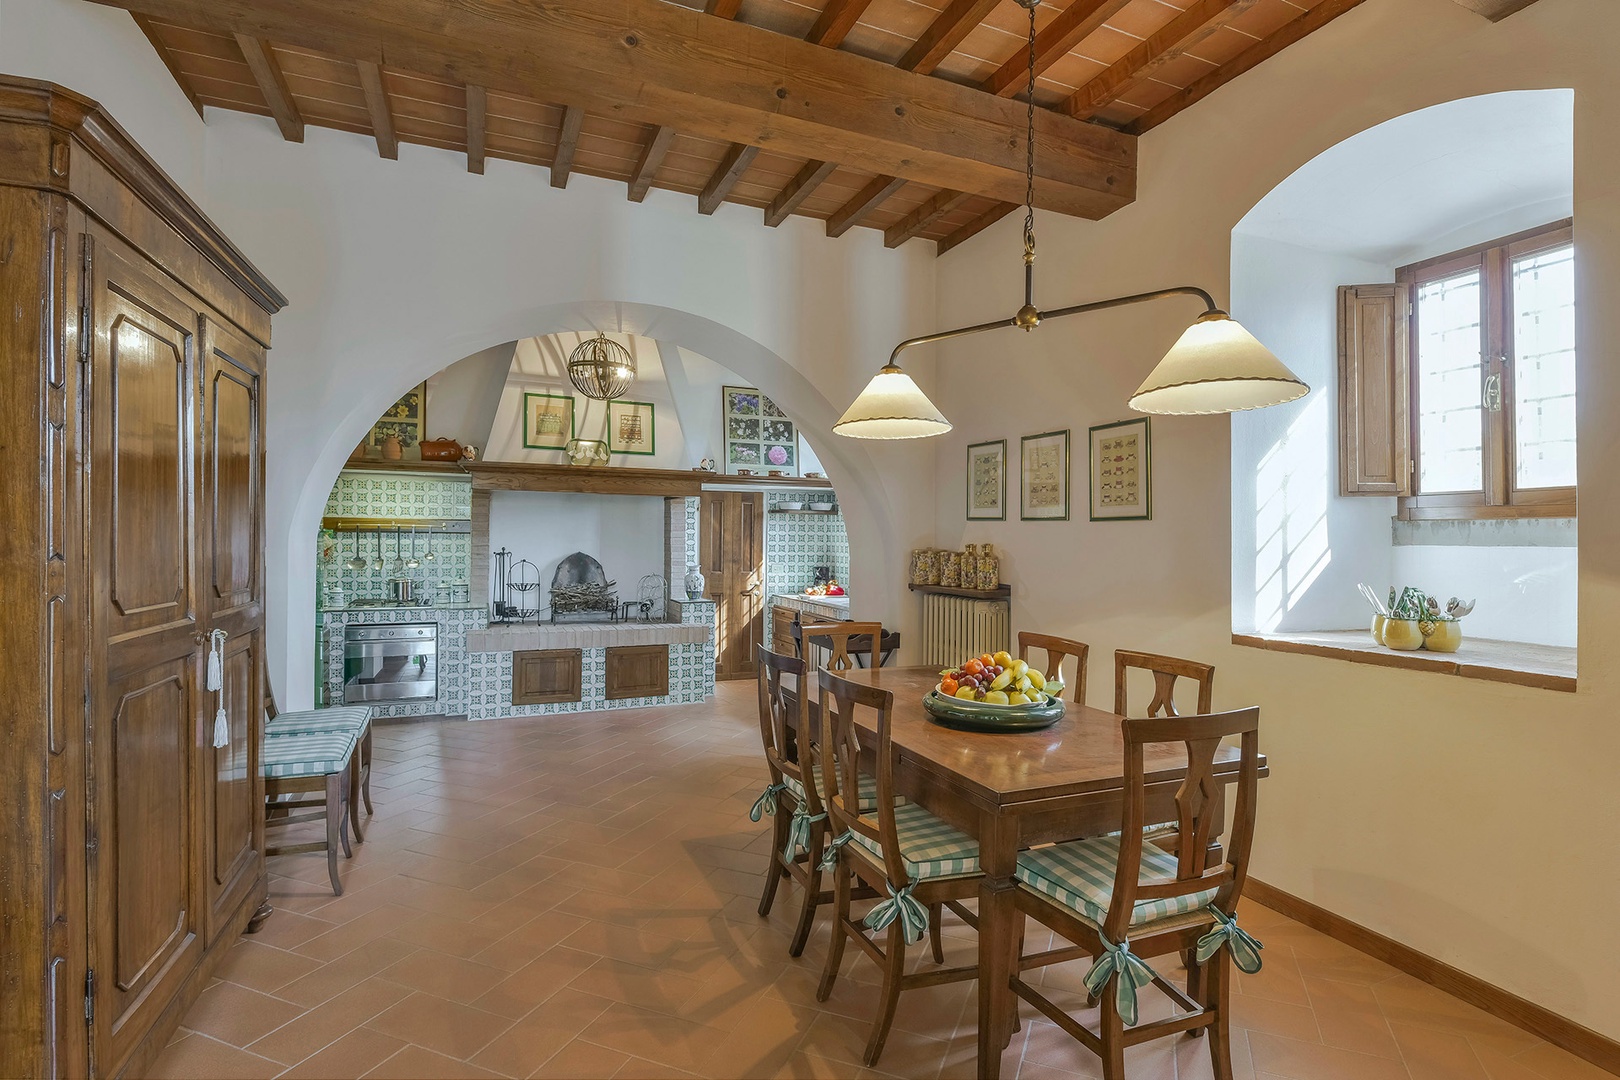 Fully equipped eat-in Tuscan style kitchen.